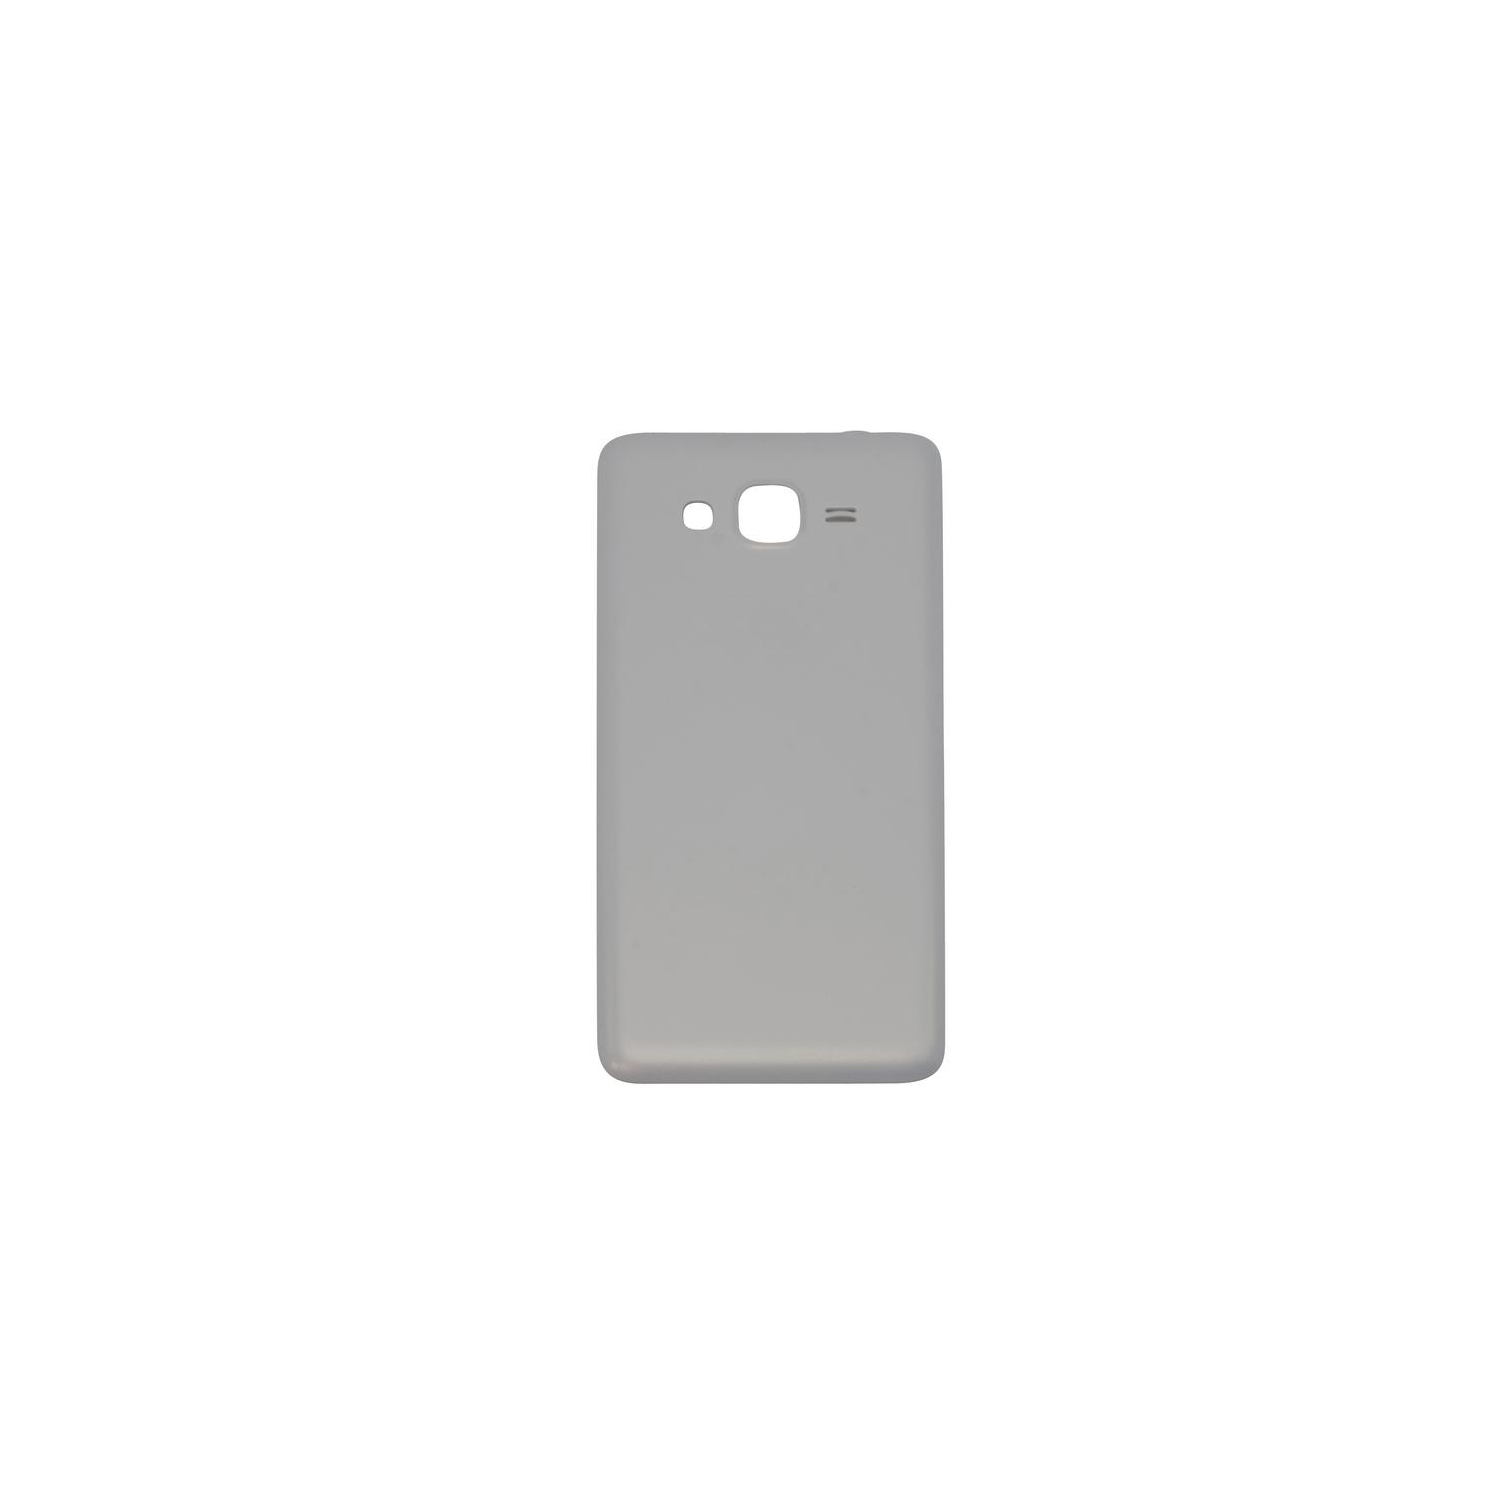 Samsung Galaxy Grand Prime G530 Back Battery Door Cover - White